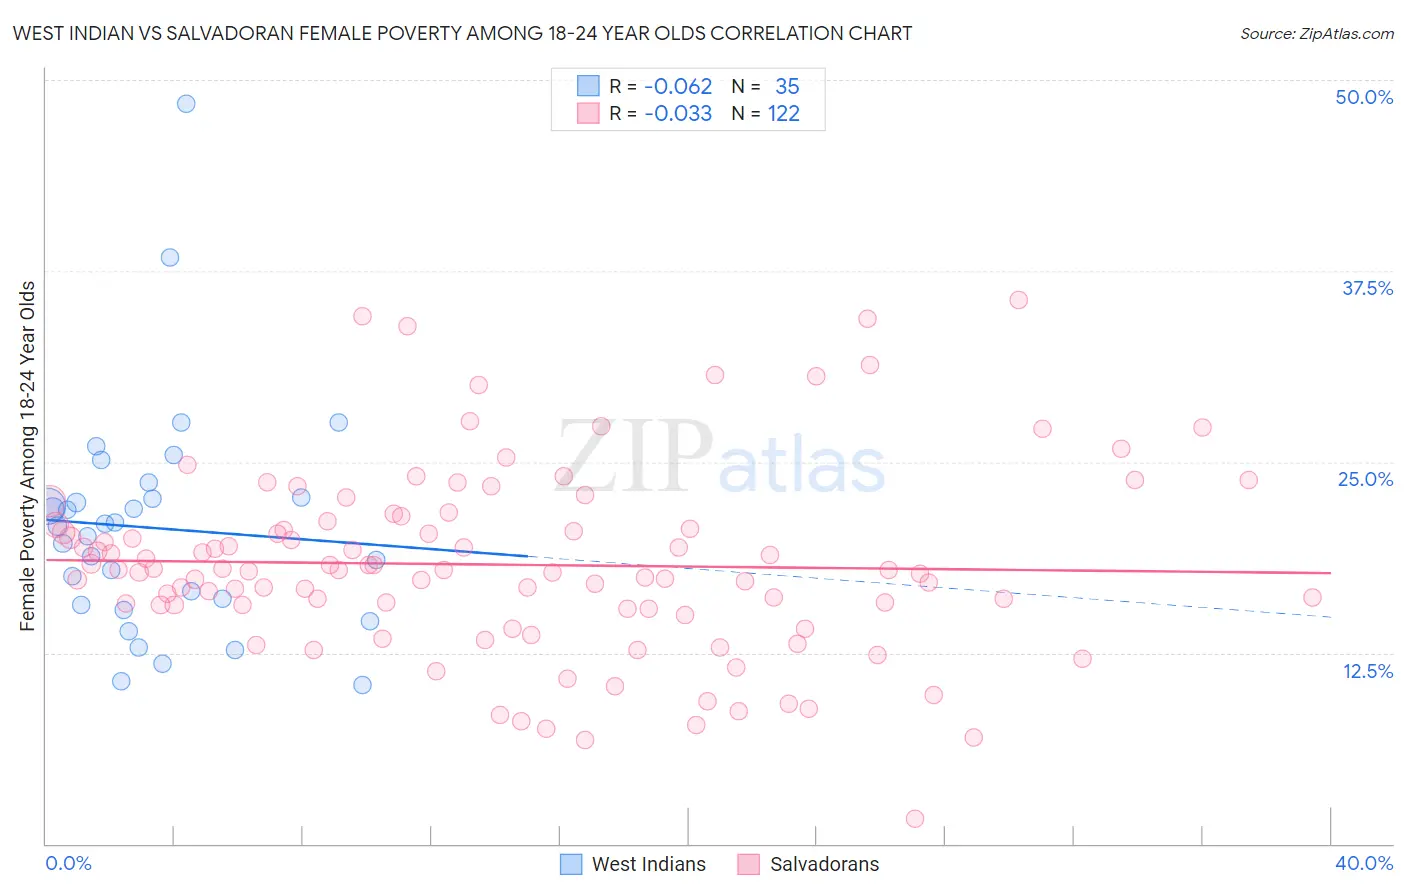 West Indian vs Salvadoran Female Poverty Among 18-24 Year Olds